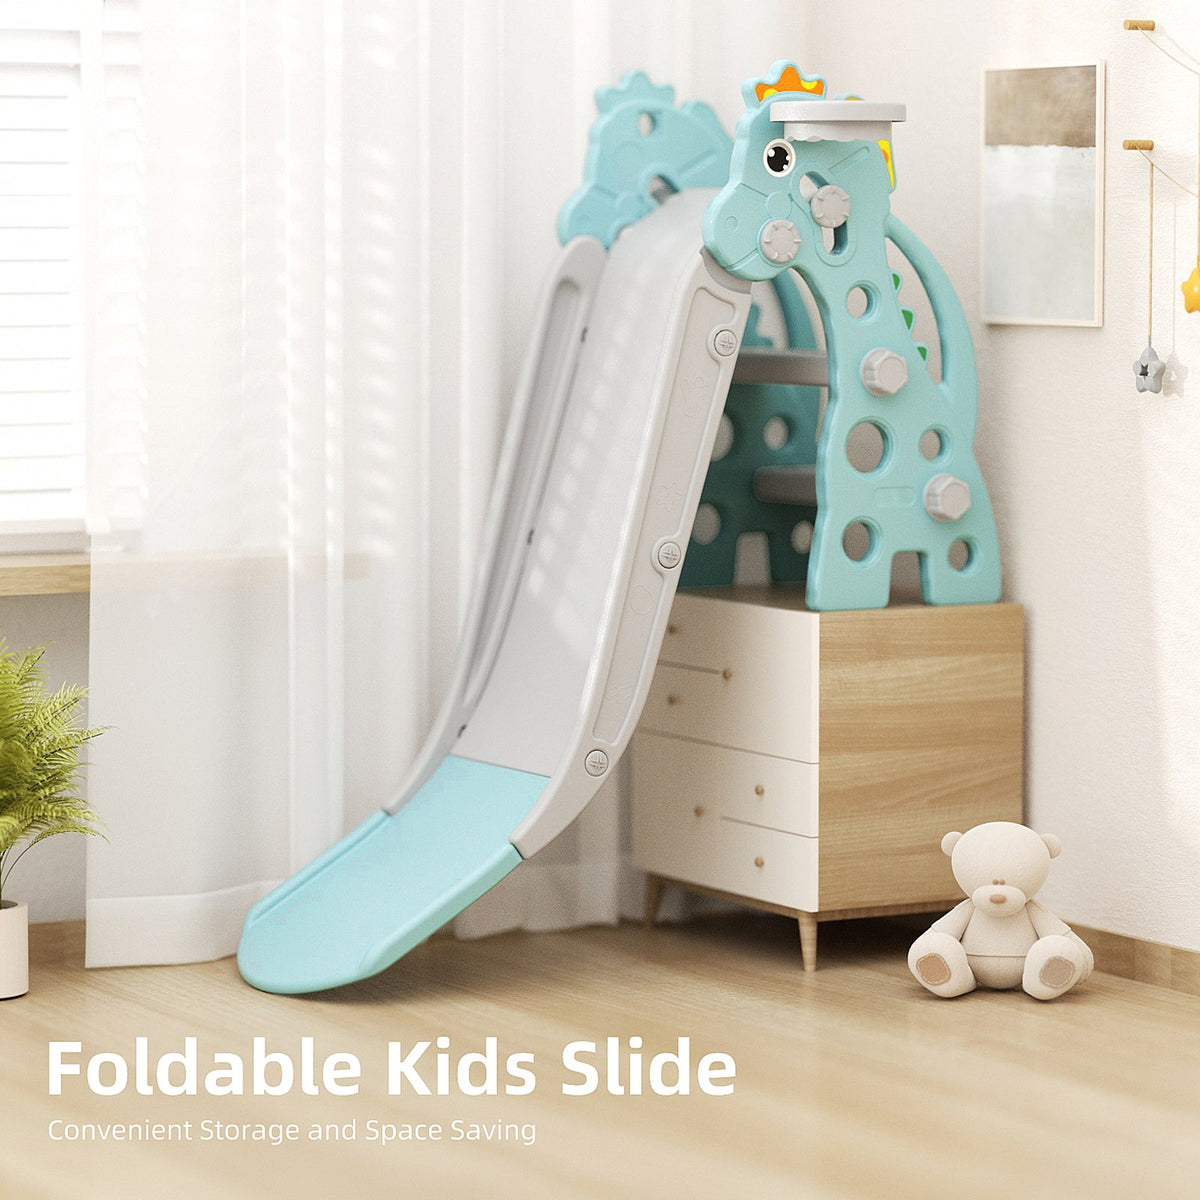 67i 3 in 1 Foldable Slide Set for Toddlers Age 1-3 Green